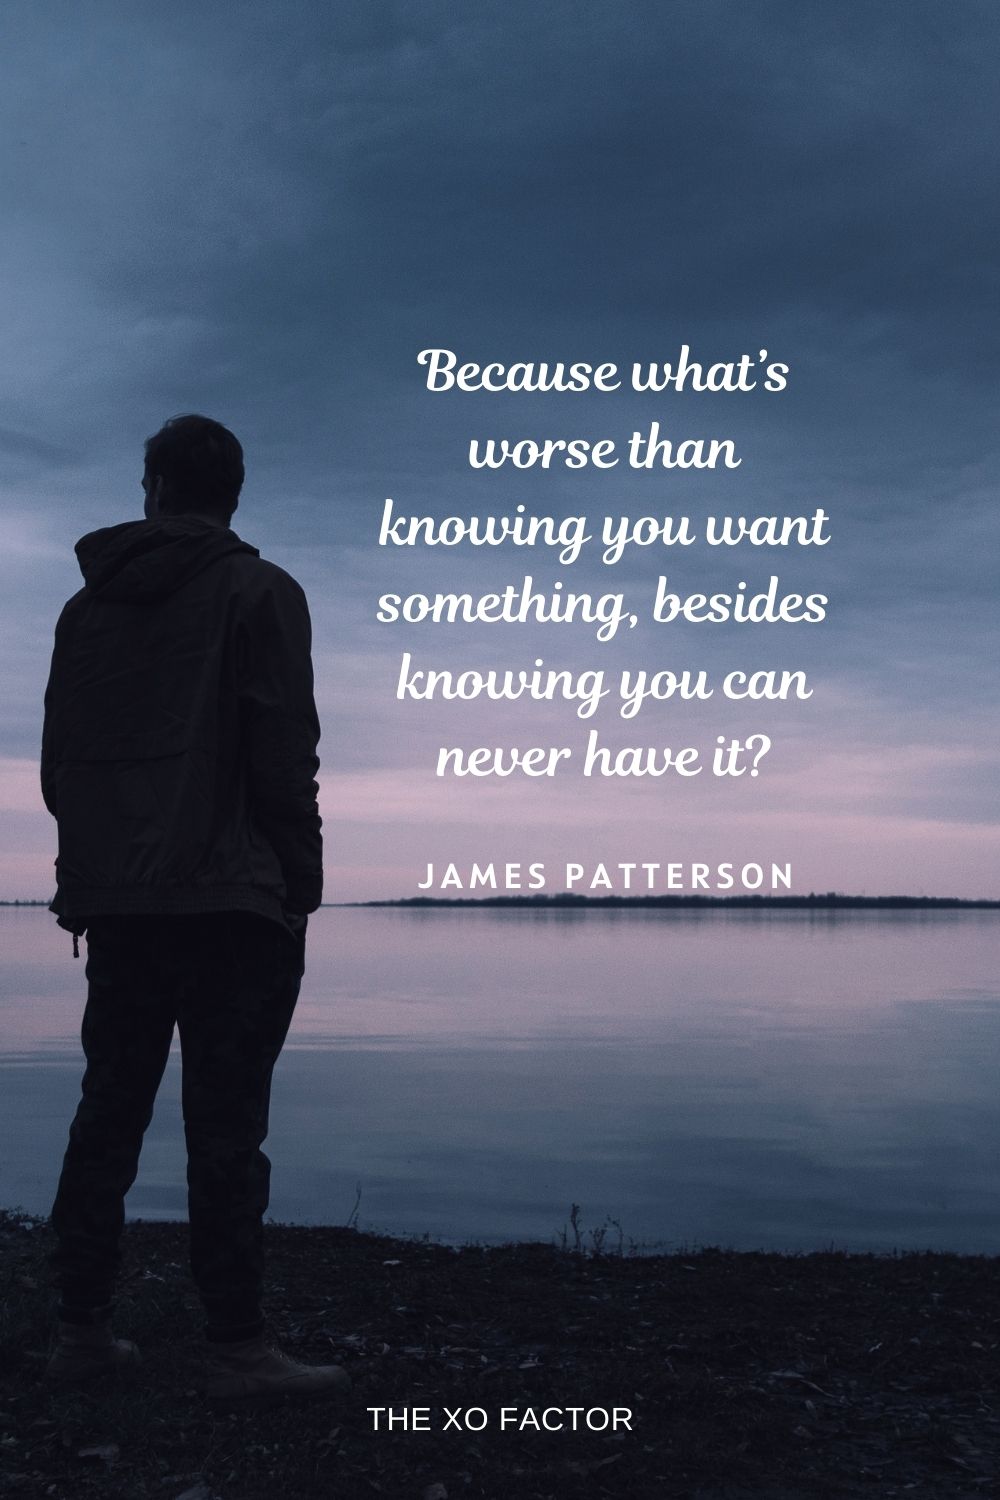 Because what’s worse than knowing you want something, besides knowing you can never have it? James Patterson